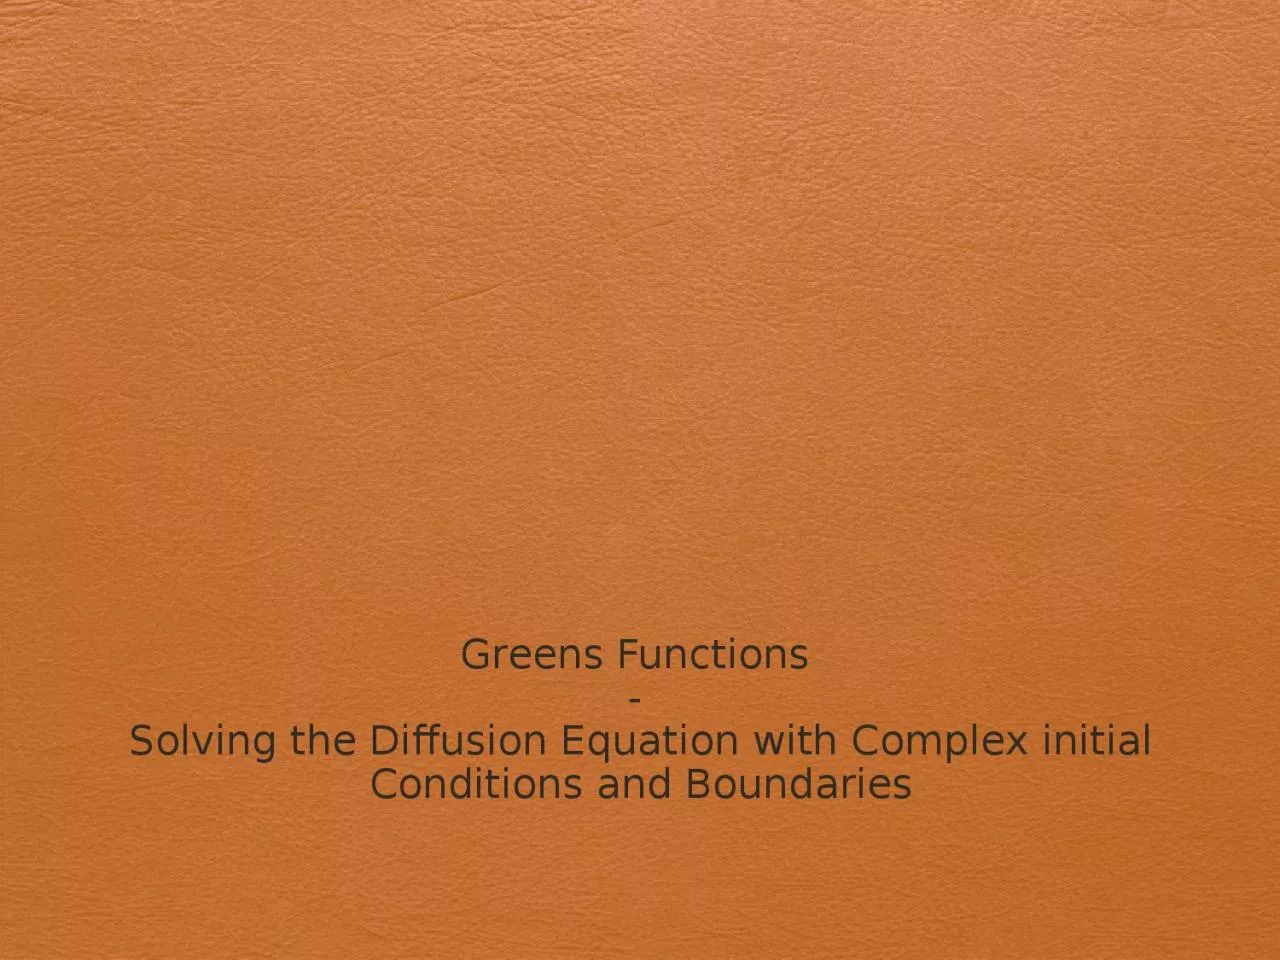 Greens Functions  -  Solving the Diffusion Equation with Complex initial Conditions and